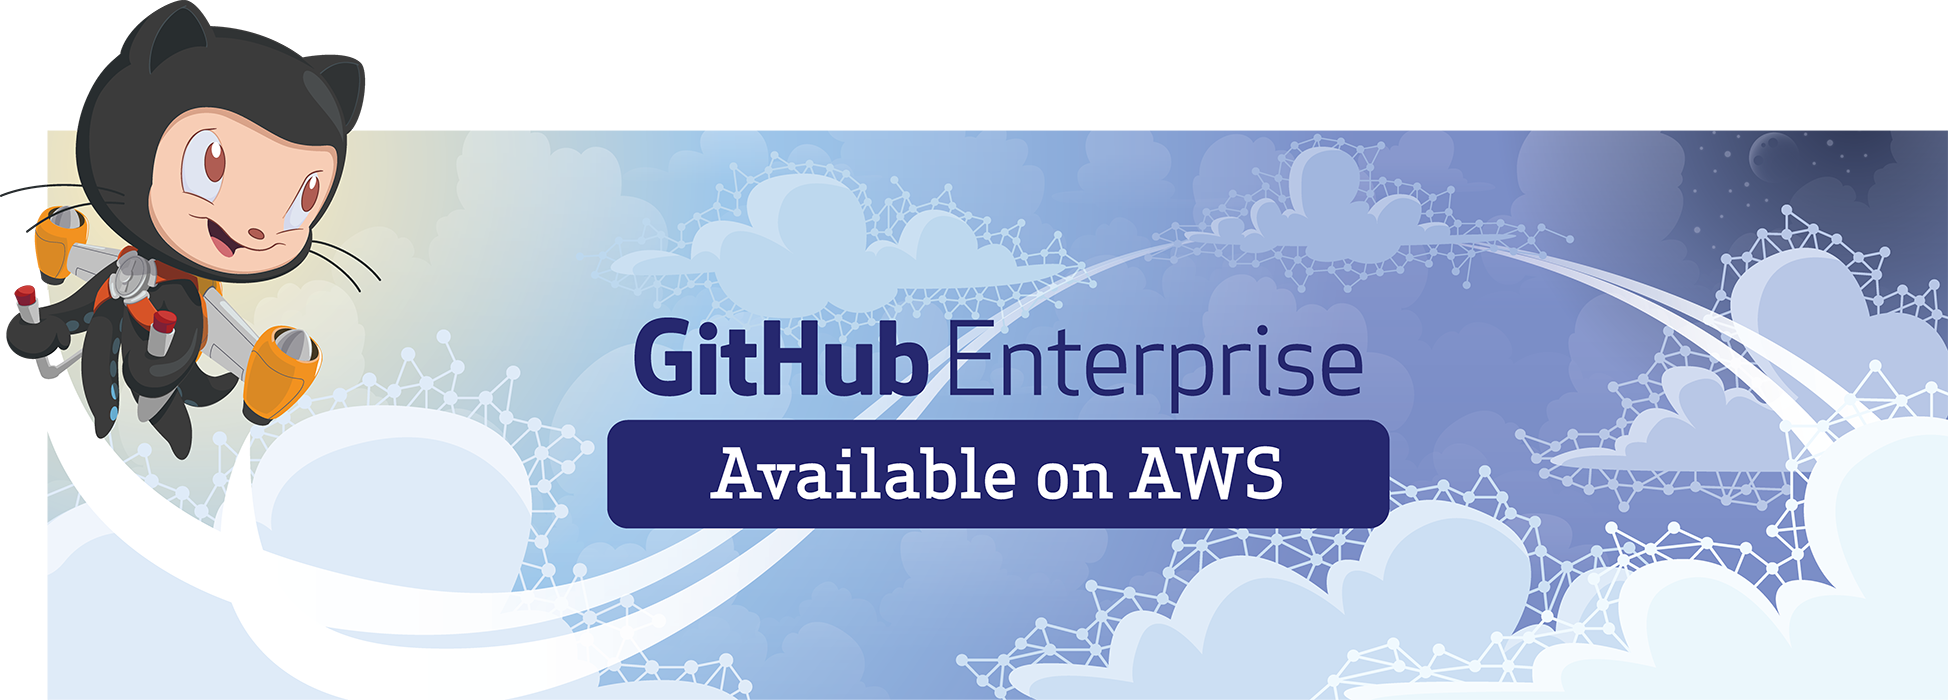 Image of the “after” view of the billboard, featuring the Octocat wearing a jetpack, blasting off the billboard. The text reads, “GitHub Enterprise: Available on AWS”